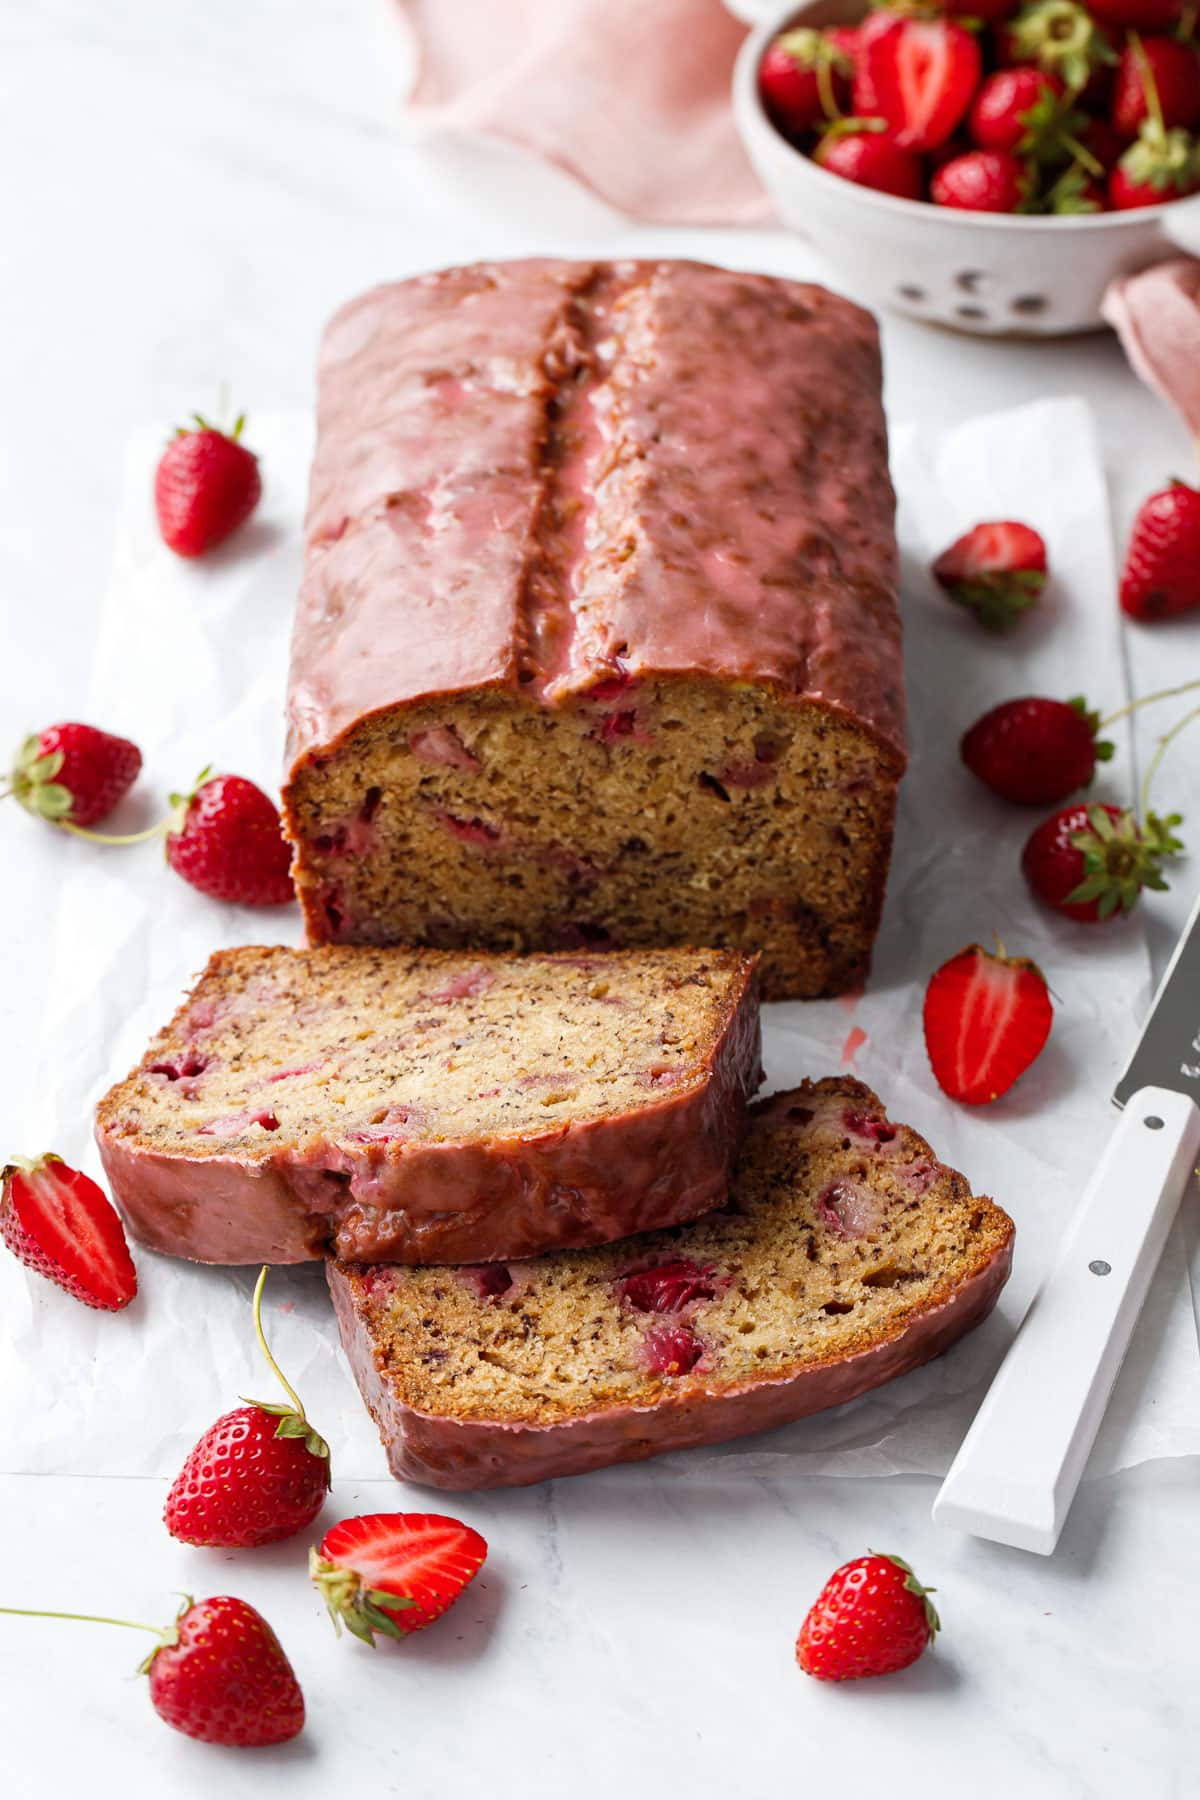 Loaf of Strawberry Banana Bread with a pink glaze, two slices laying down to show the interior texture, and strainer with strawberries, knife, and pink napkin in the background.